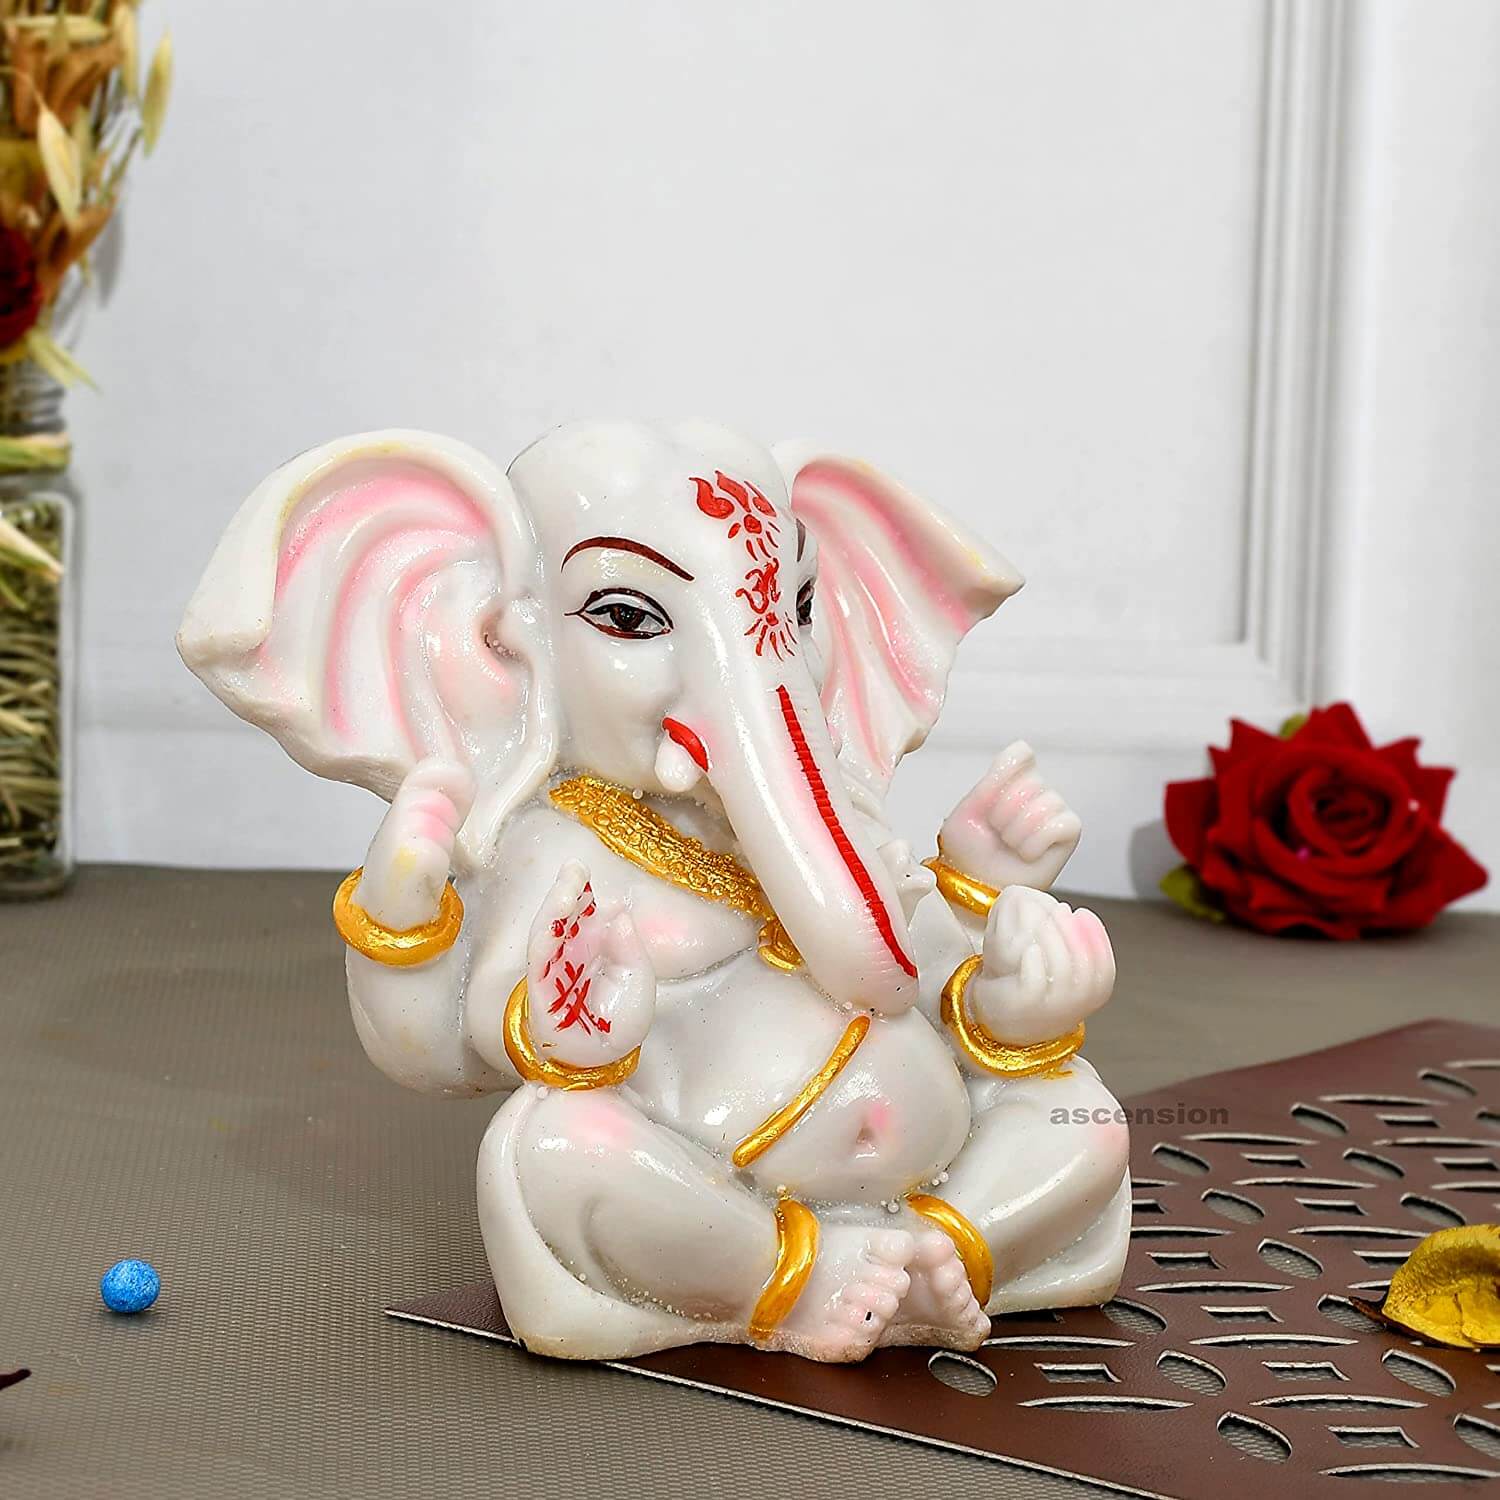 Ascension Handcrafted Polyresin Eco Friendly Lord Ganesha Ganpati Idol  Figurine Lord Ganesha Statue Showpiece for Home Decoration Diwali Puja Home  Decoration Festival Gifts (Multicolor) -